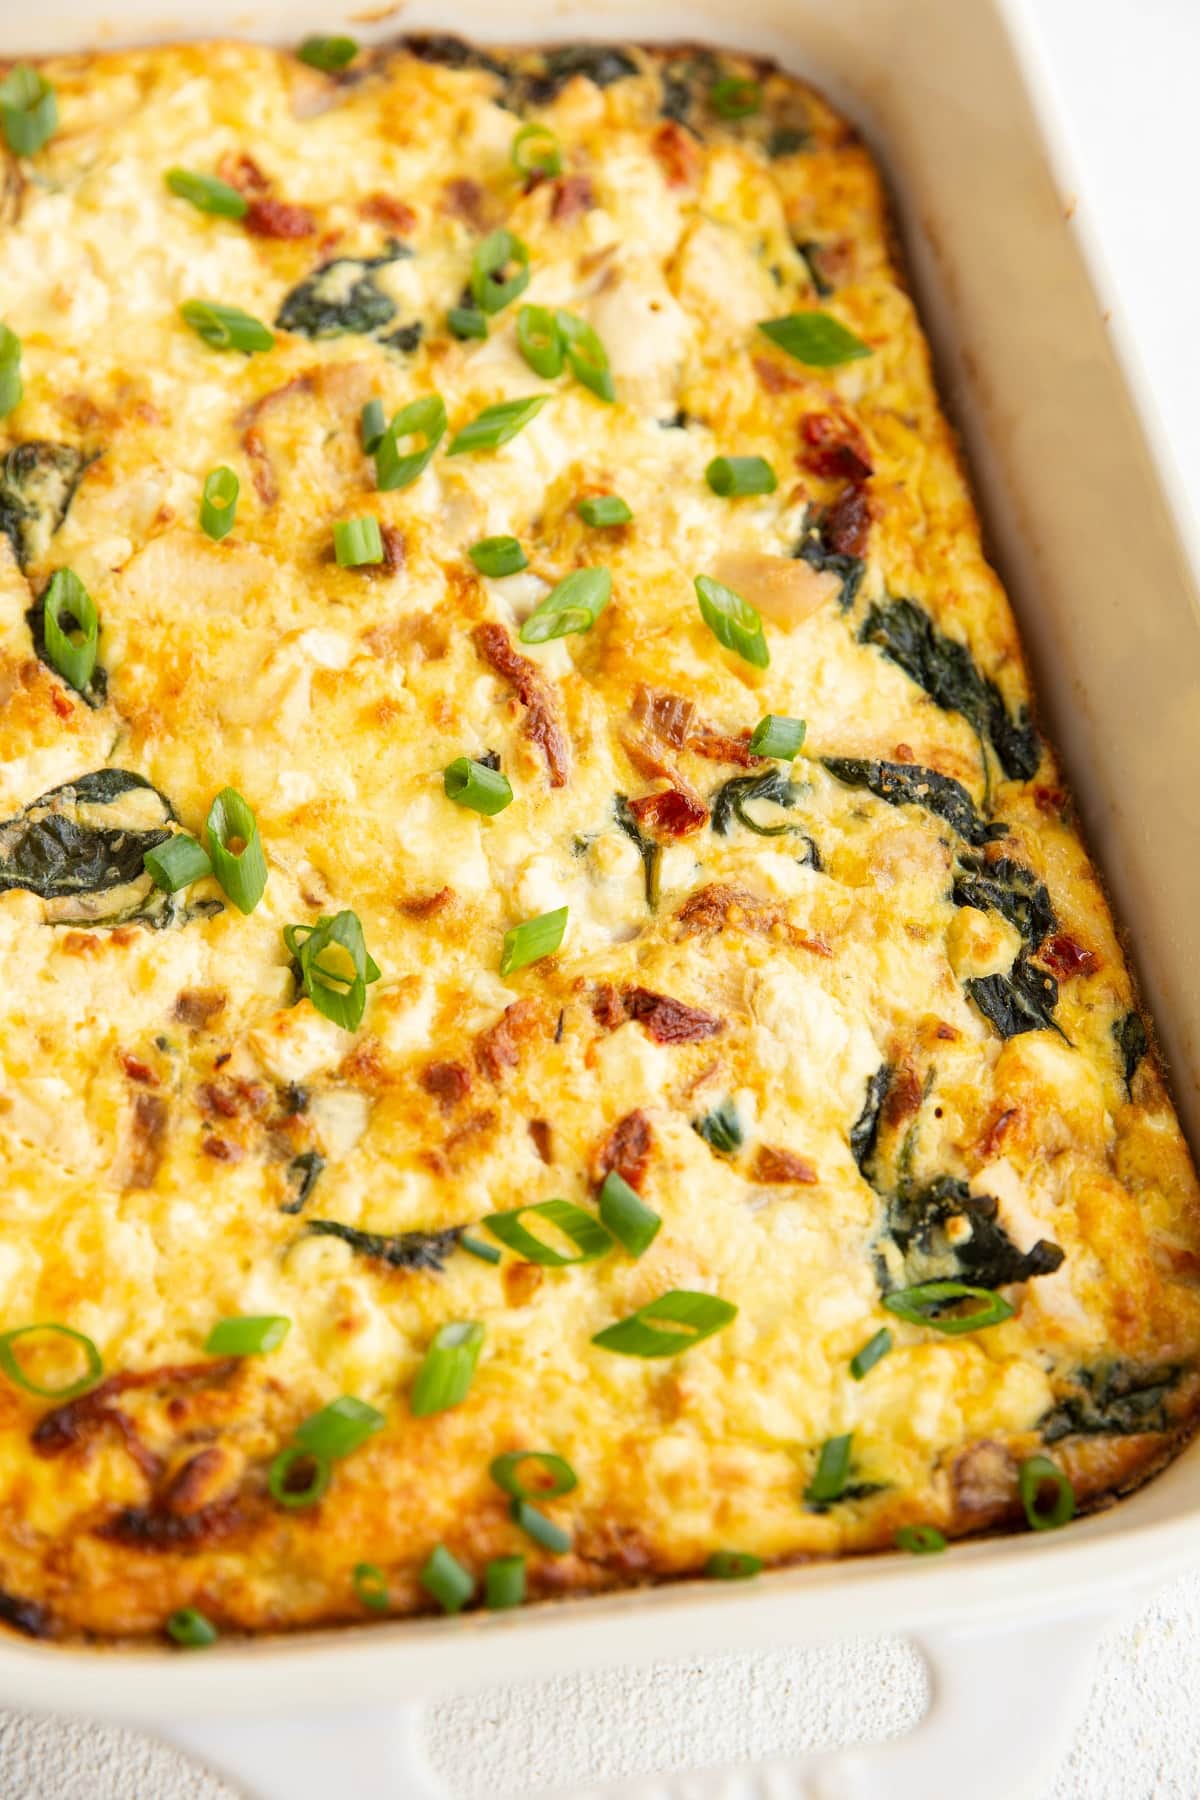 Chicken and spinach egg casserole fresh out of the oven, ready to serve.